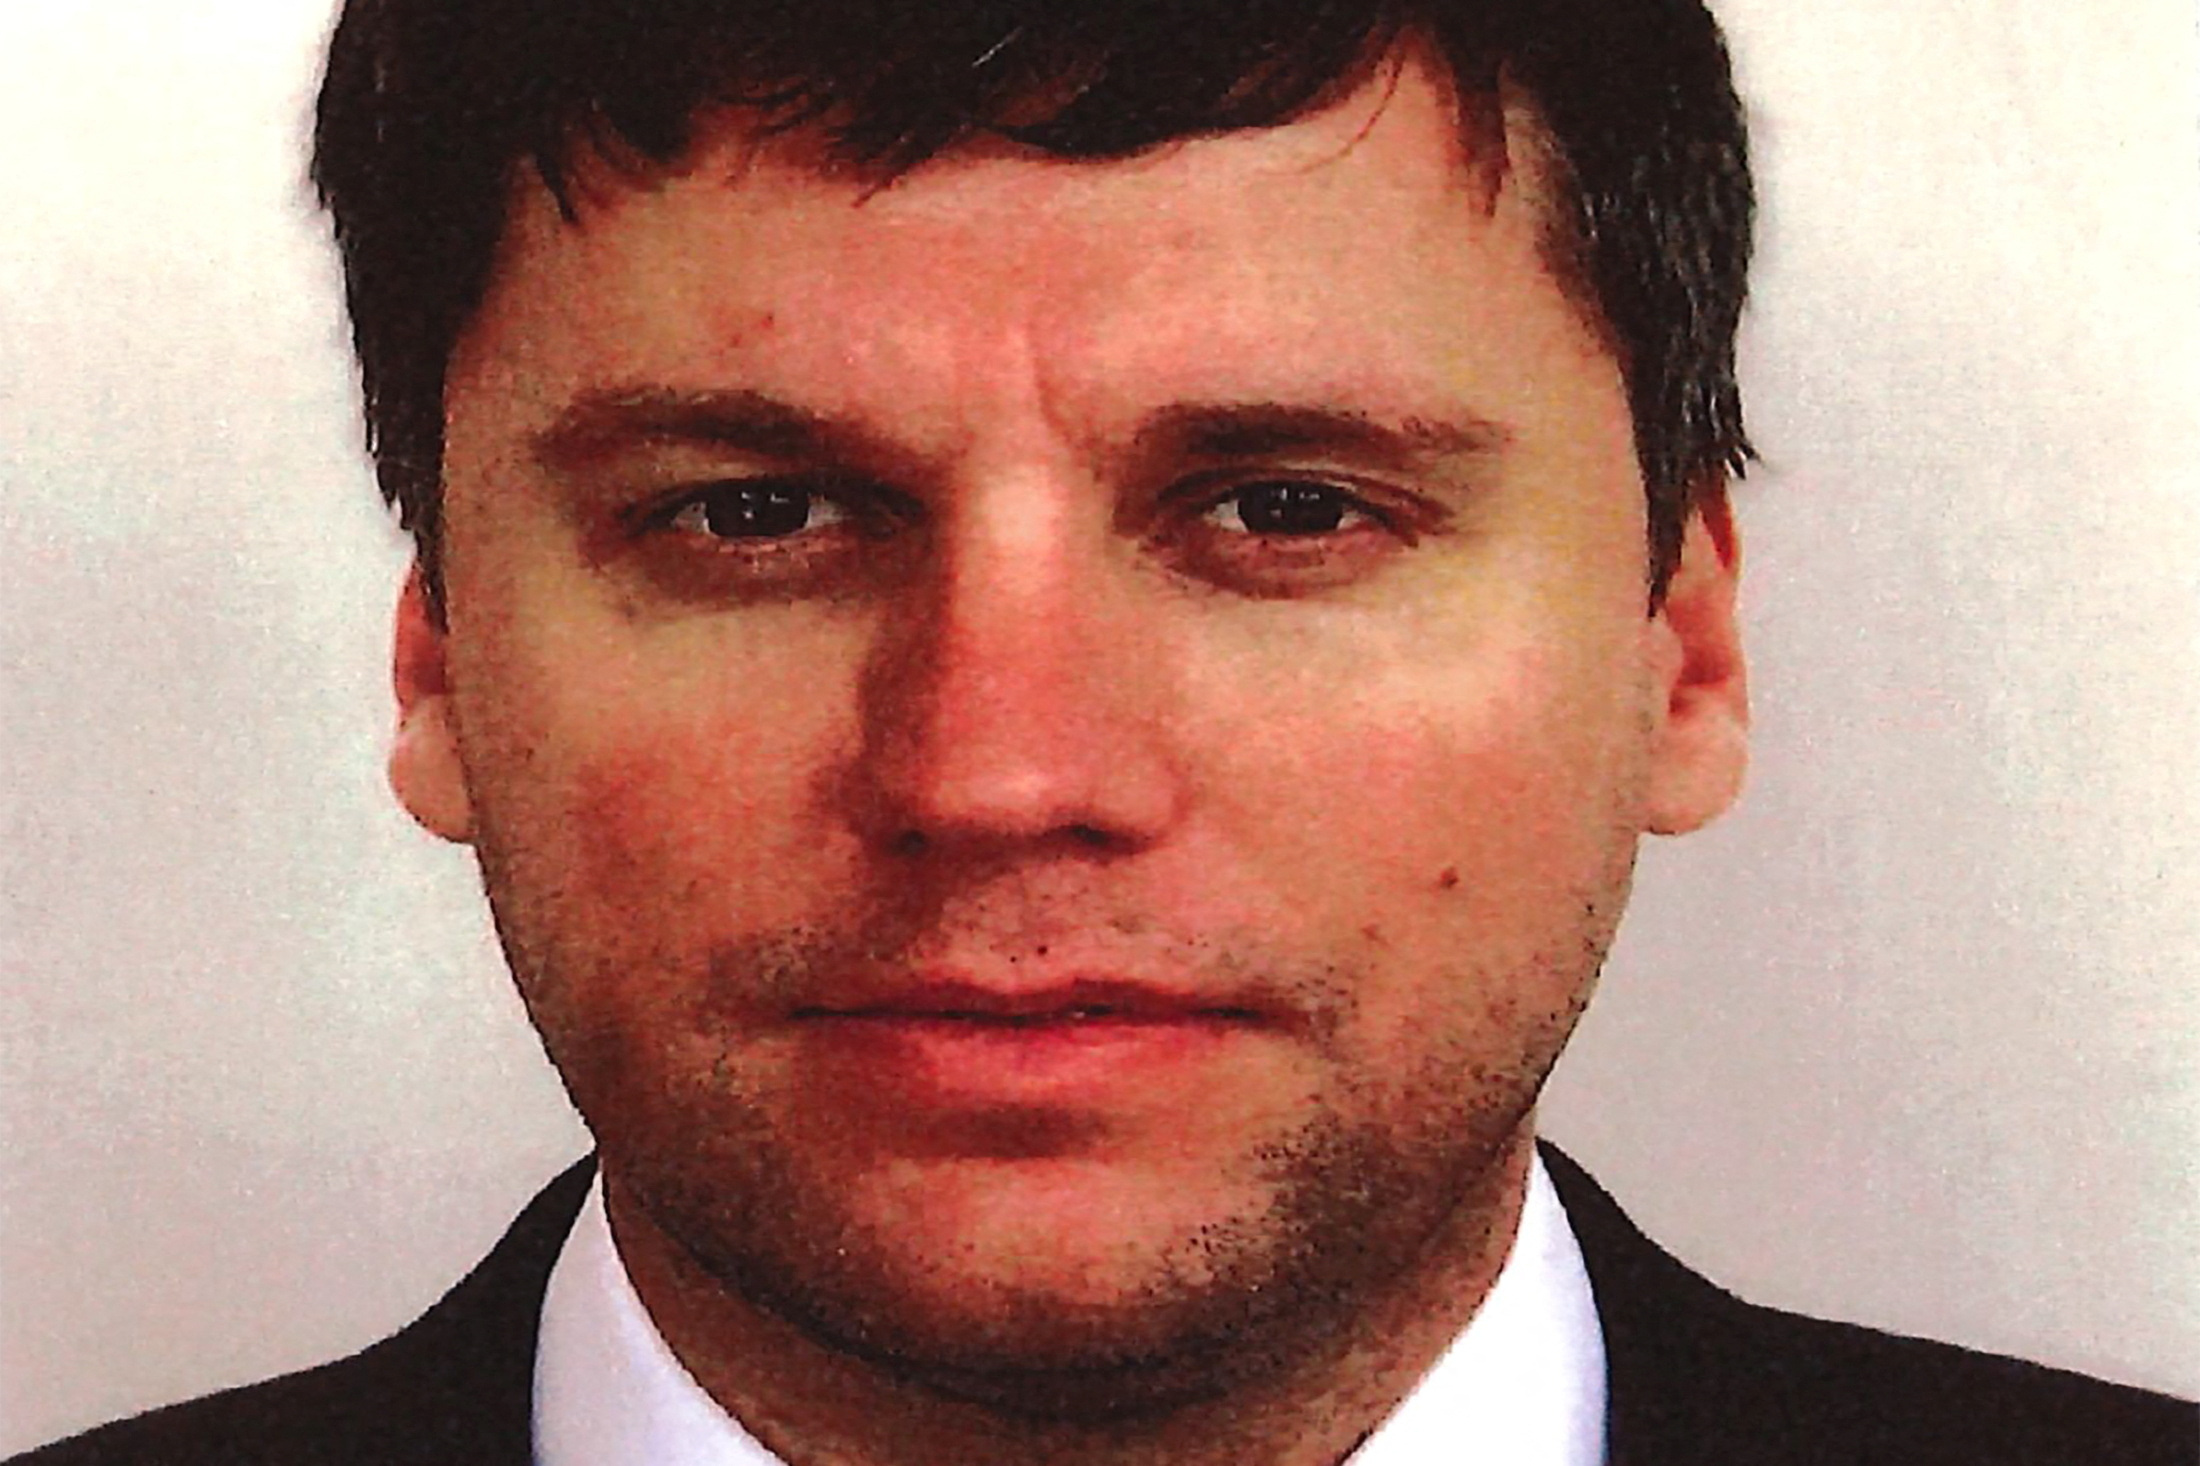 Vladislav Klyushin, an owner of an information technology company with ties to the Russian government